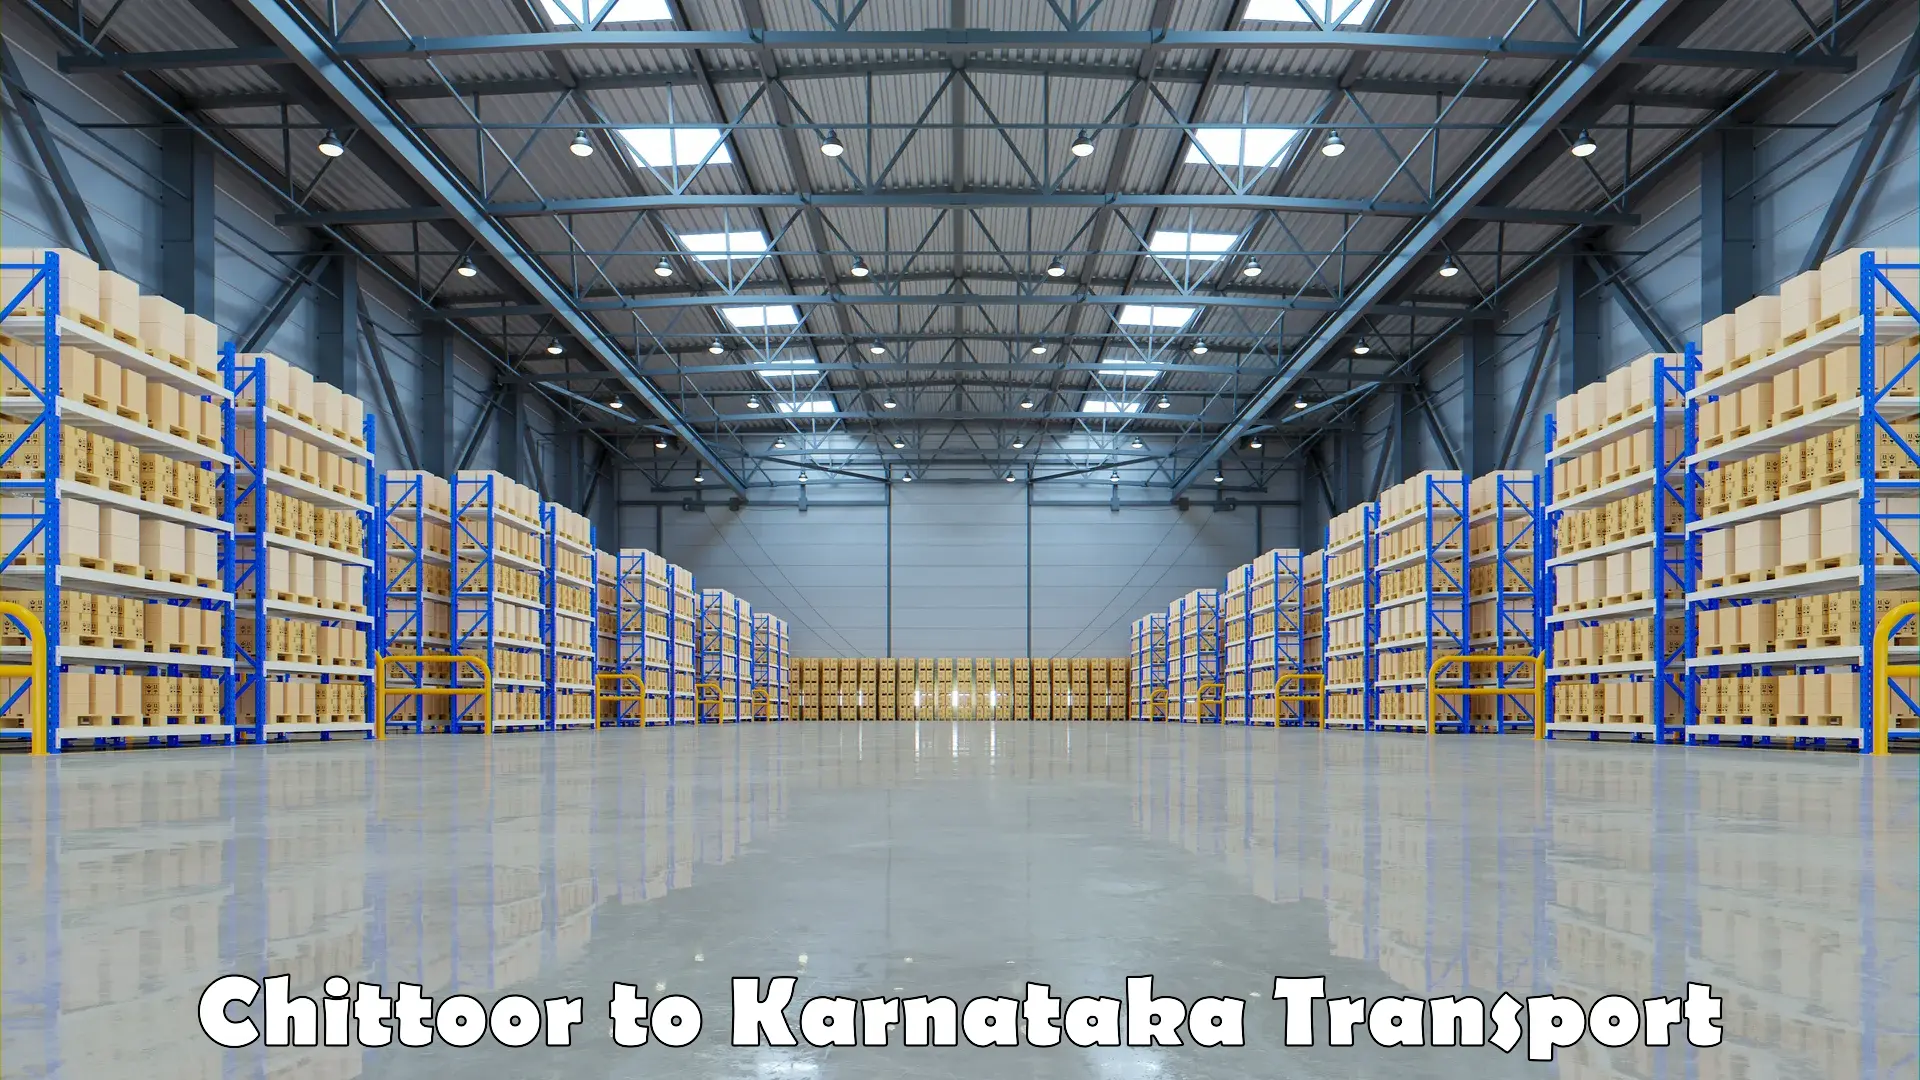 Container transport service in Chittoor to Yenepoya Mangalore